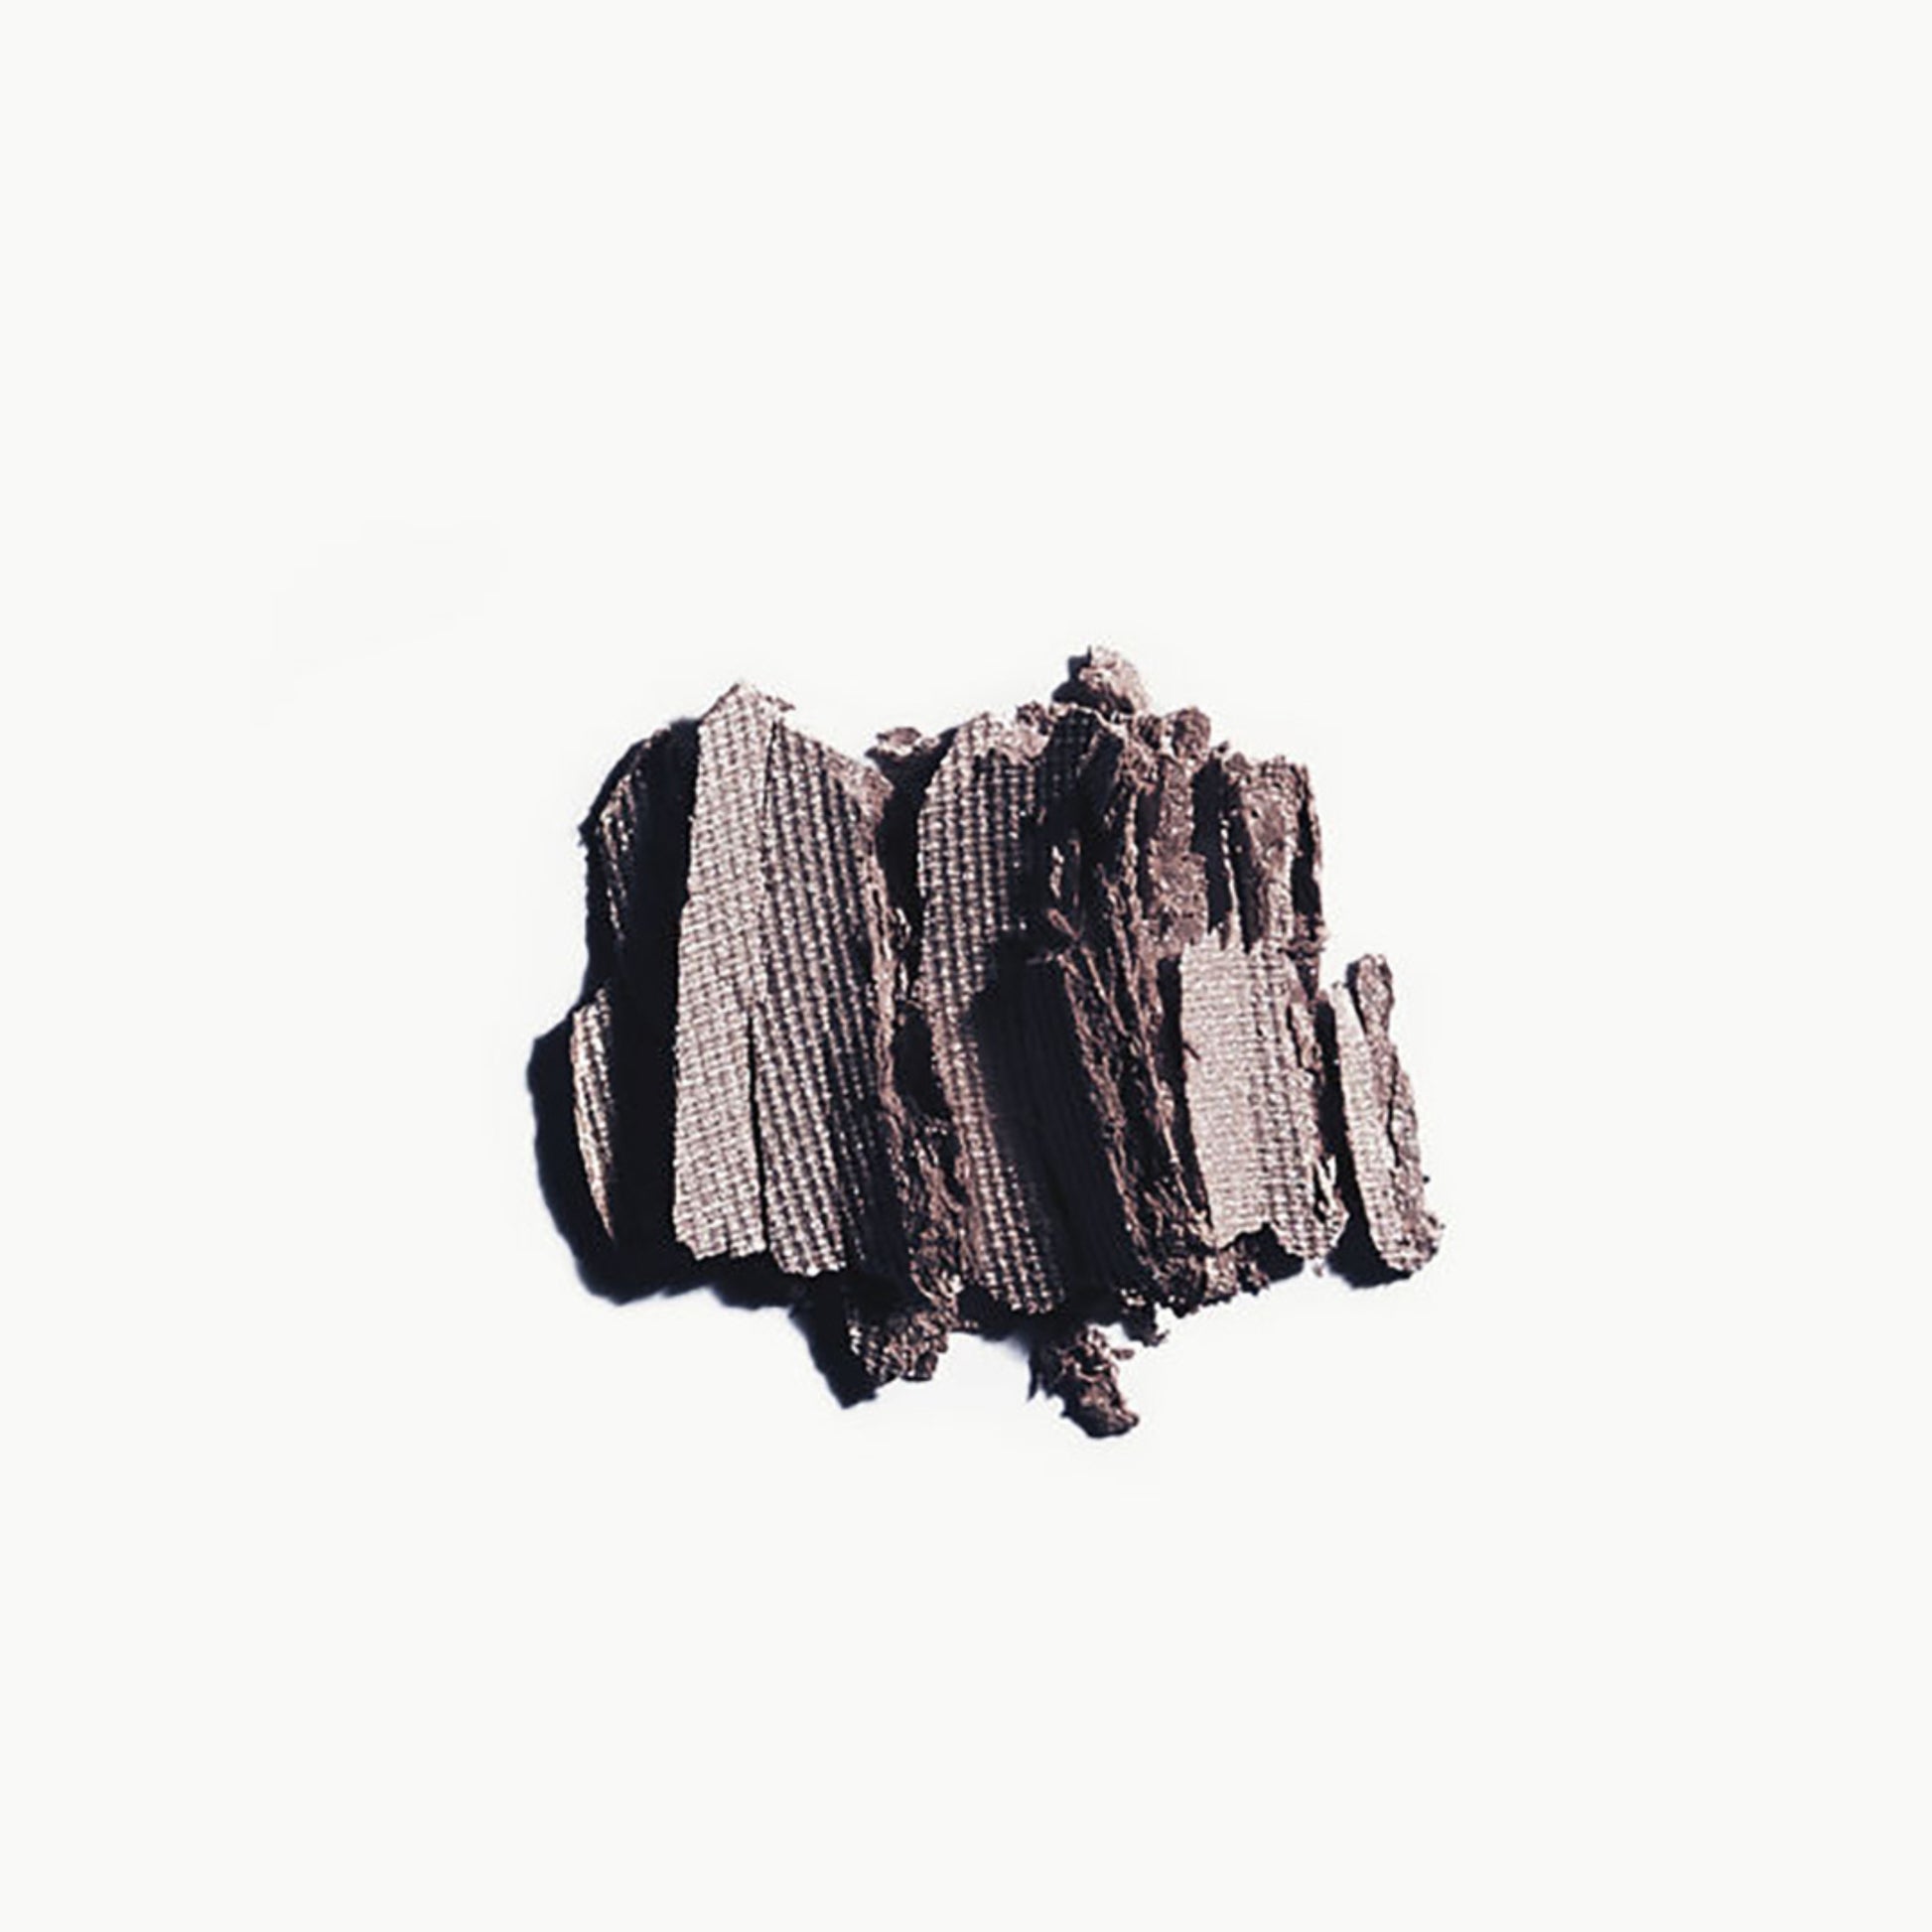 Crumbled up taupe eye shadow on a white background